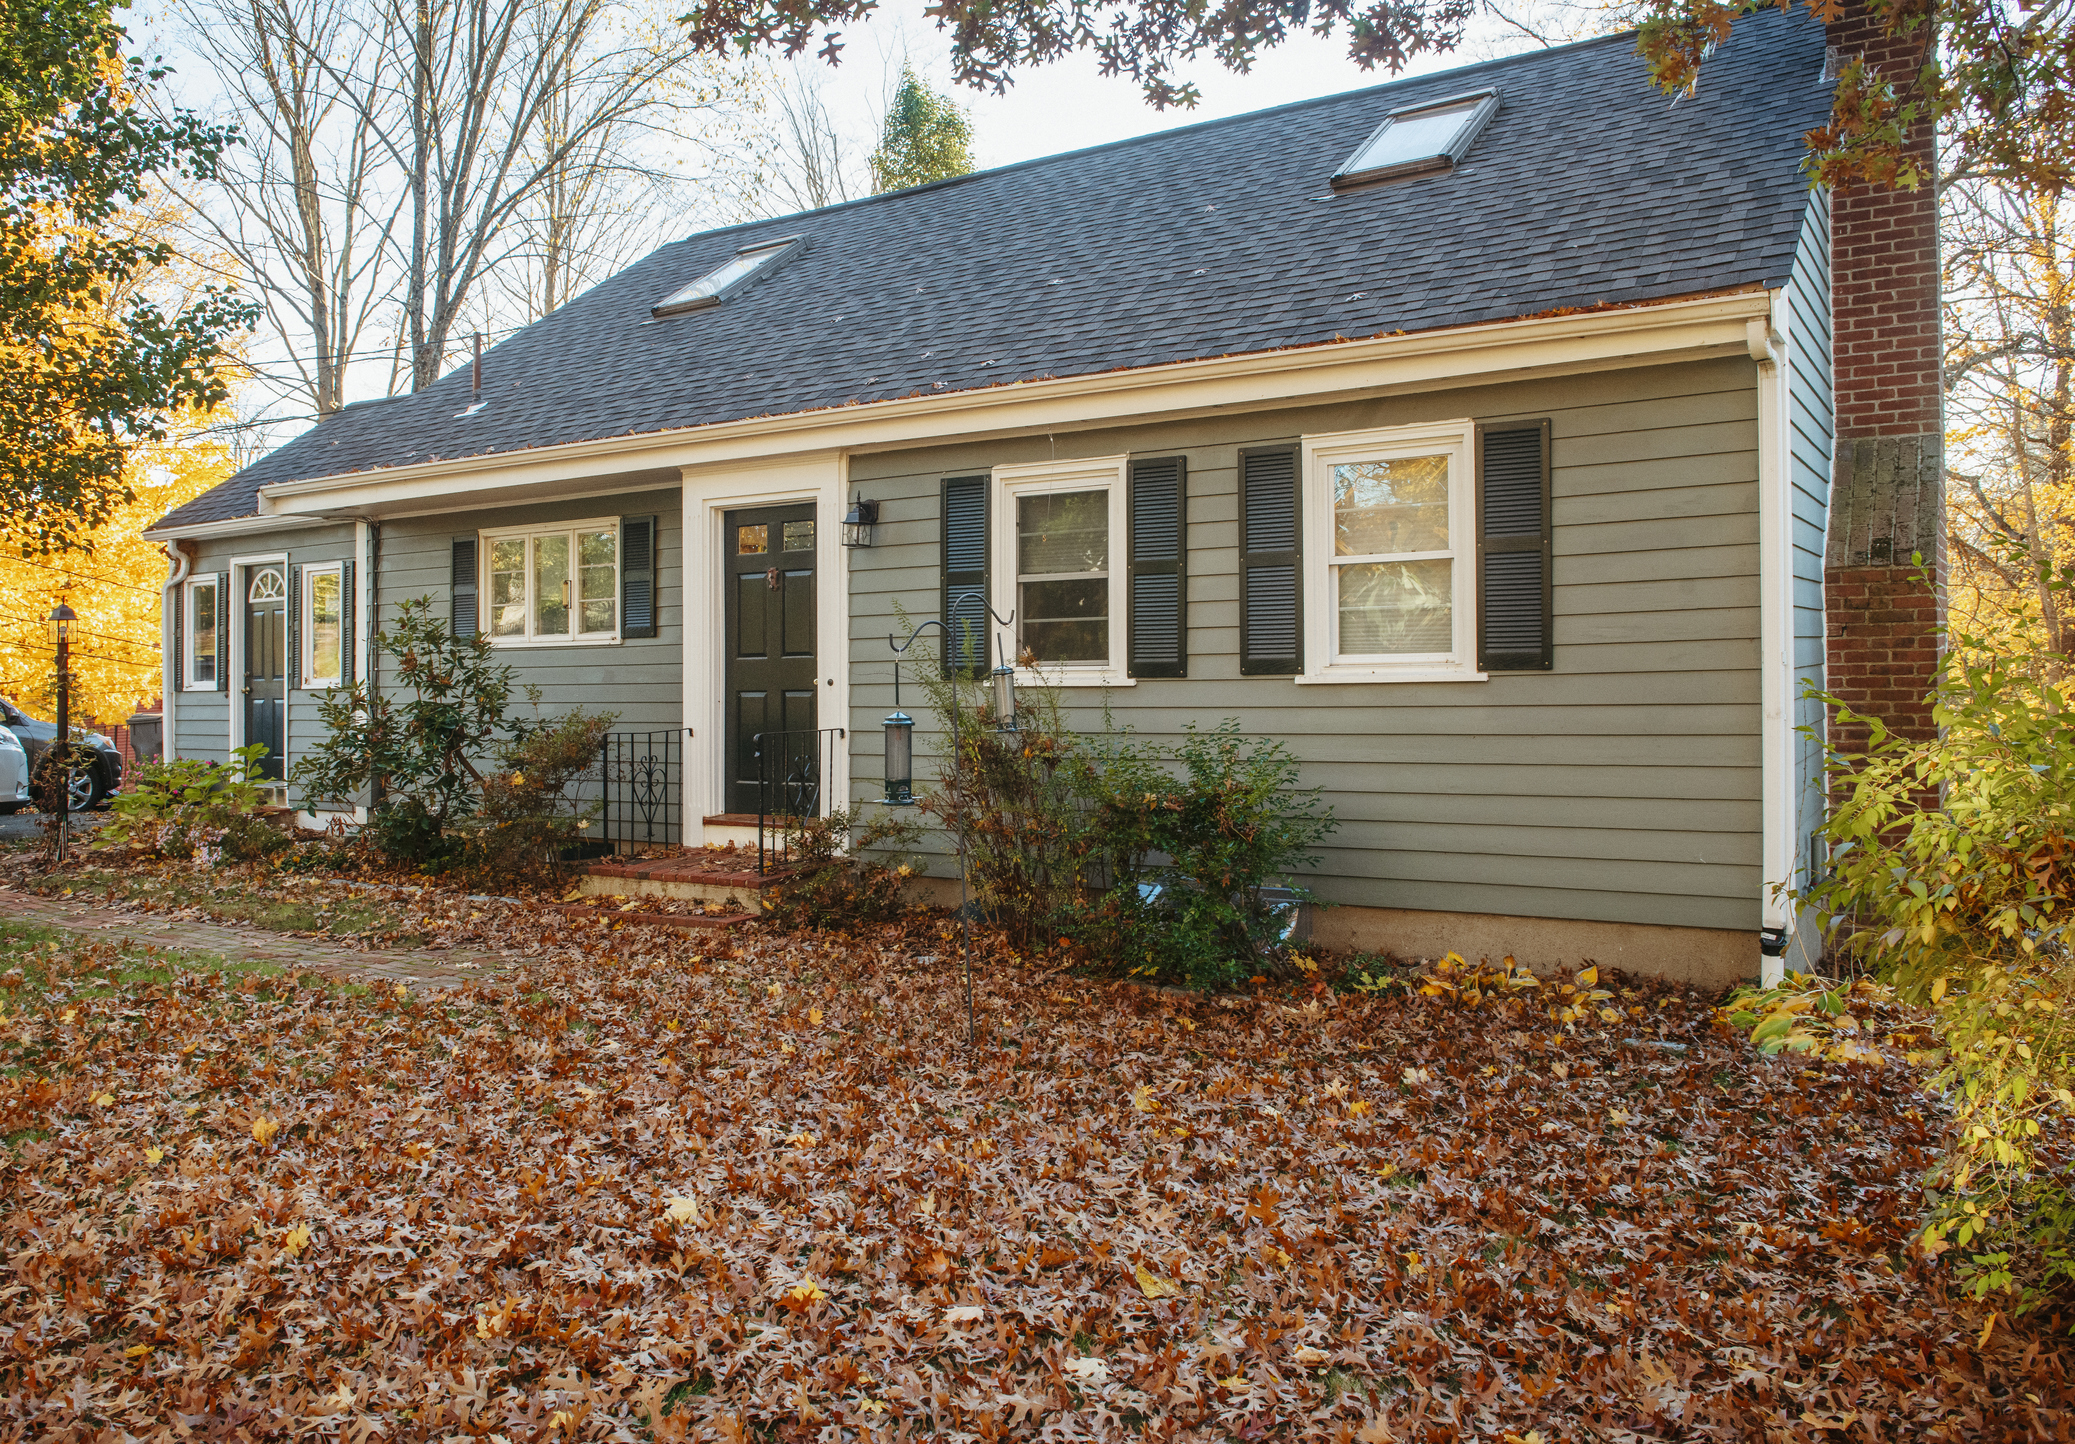 single family home in fall